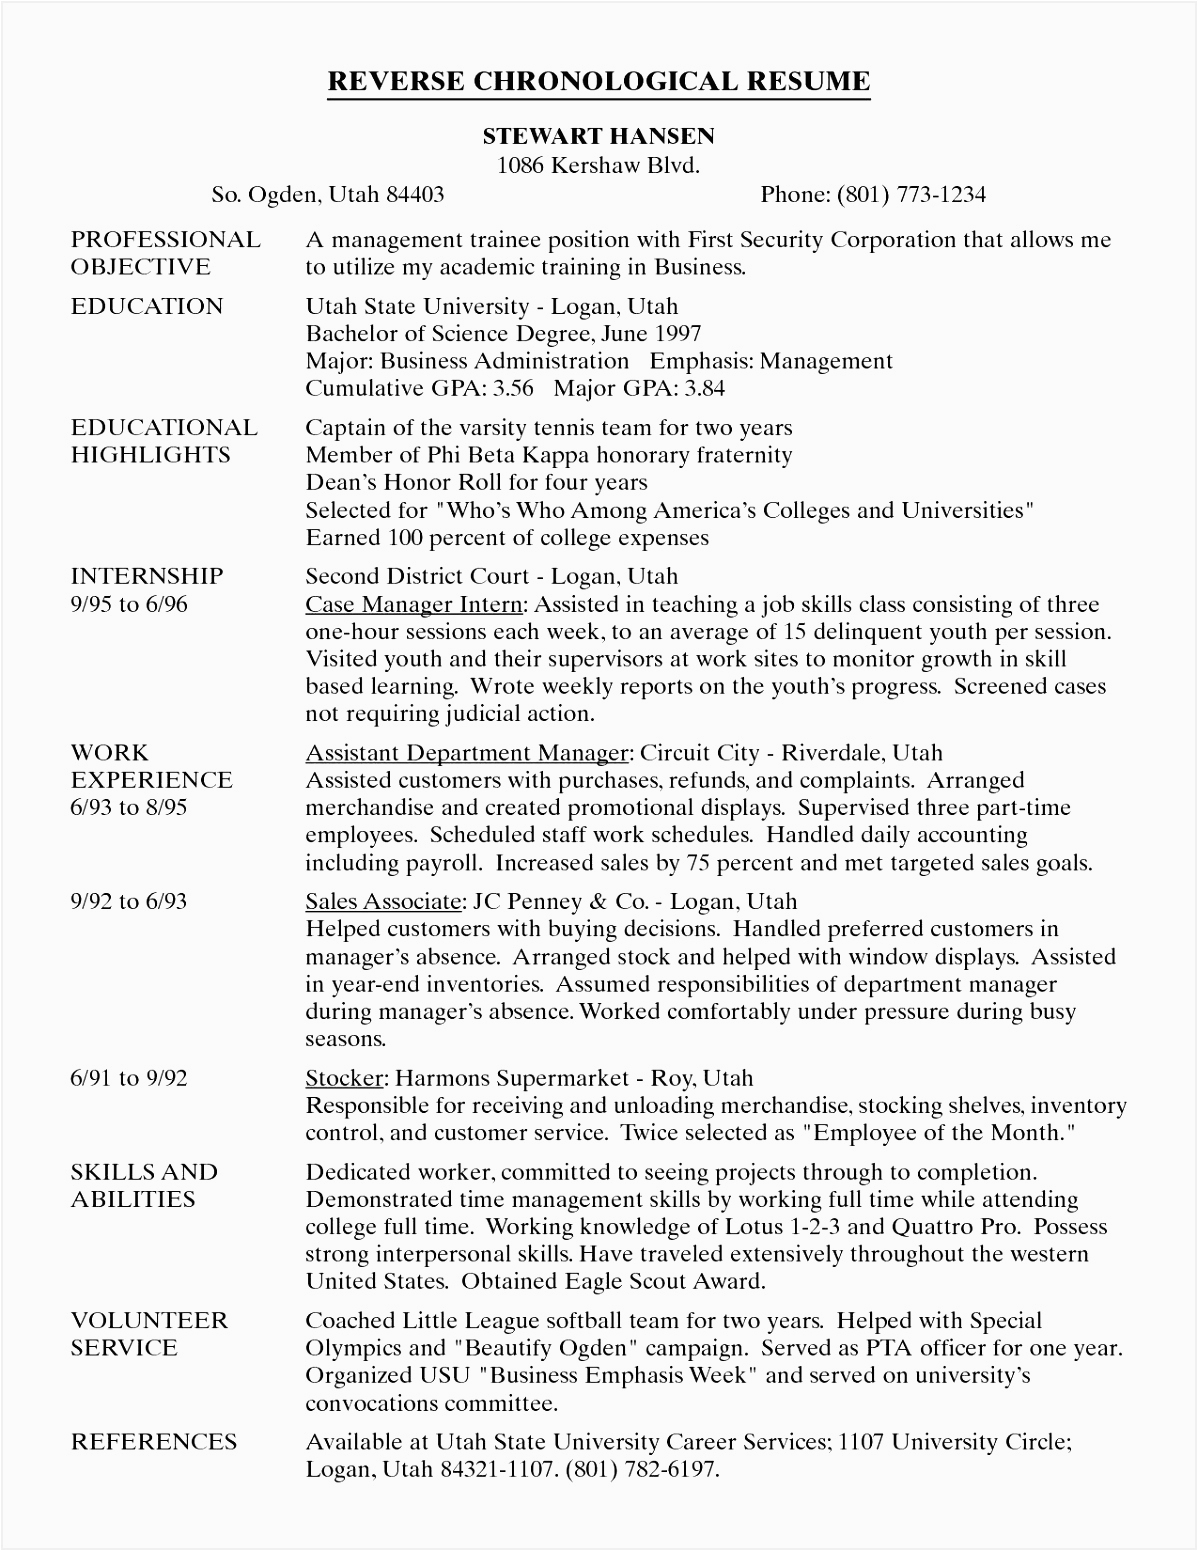 Virginia Tech Career Services Resume Samples 7 Technical Resume Example Obtkup